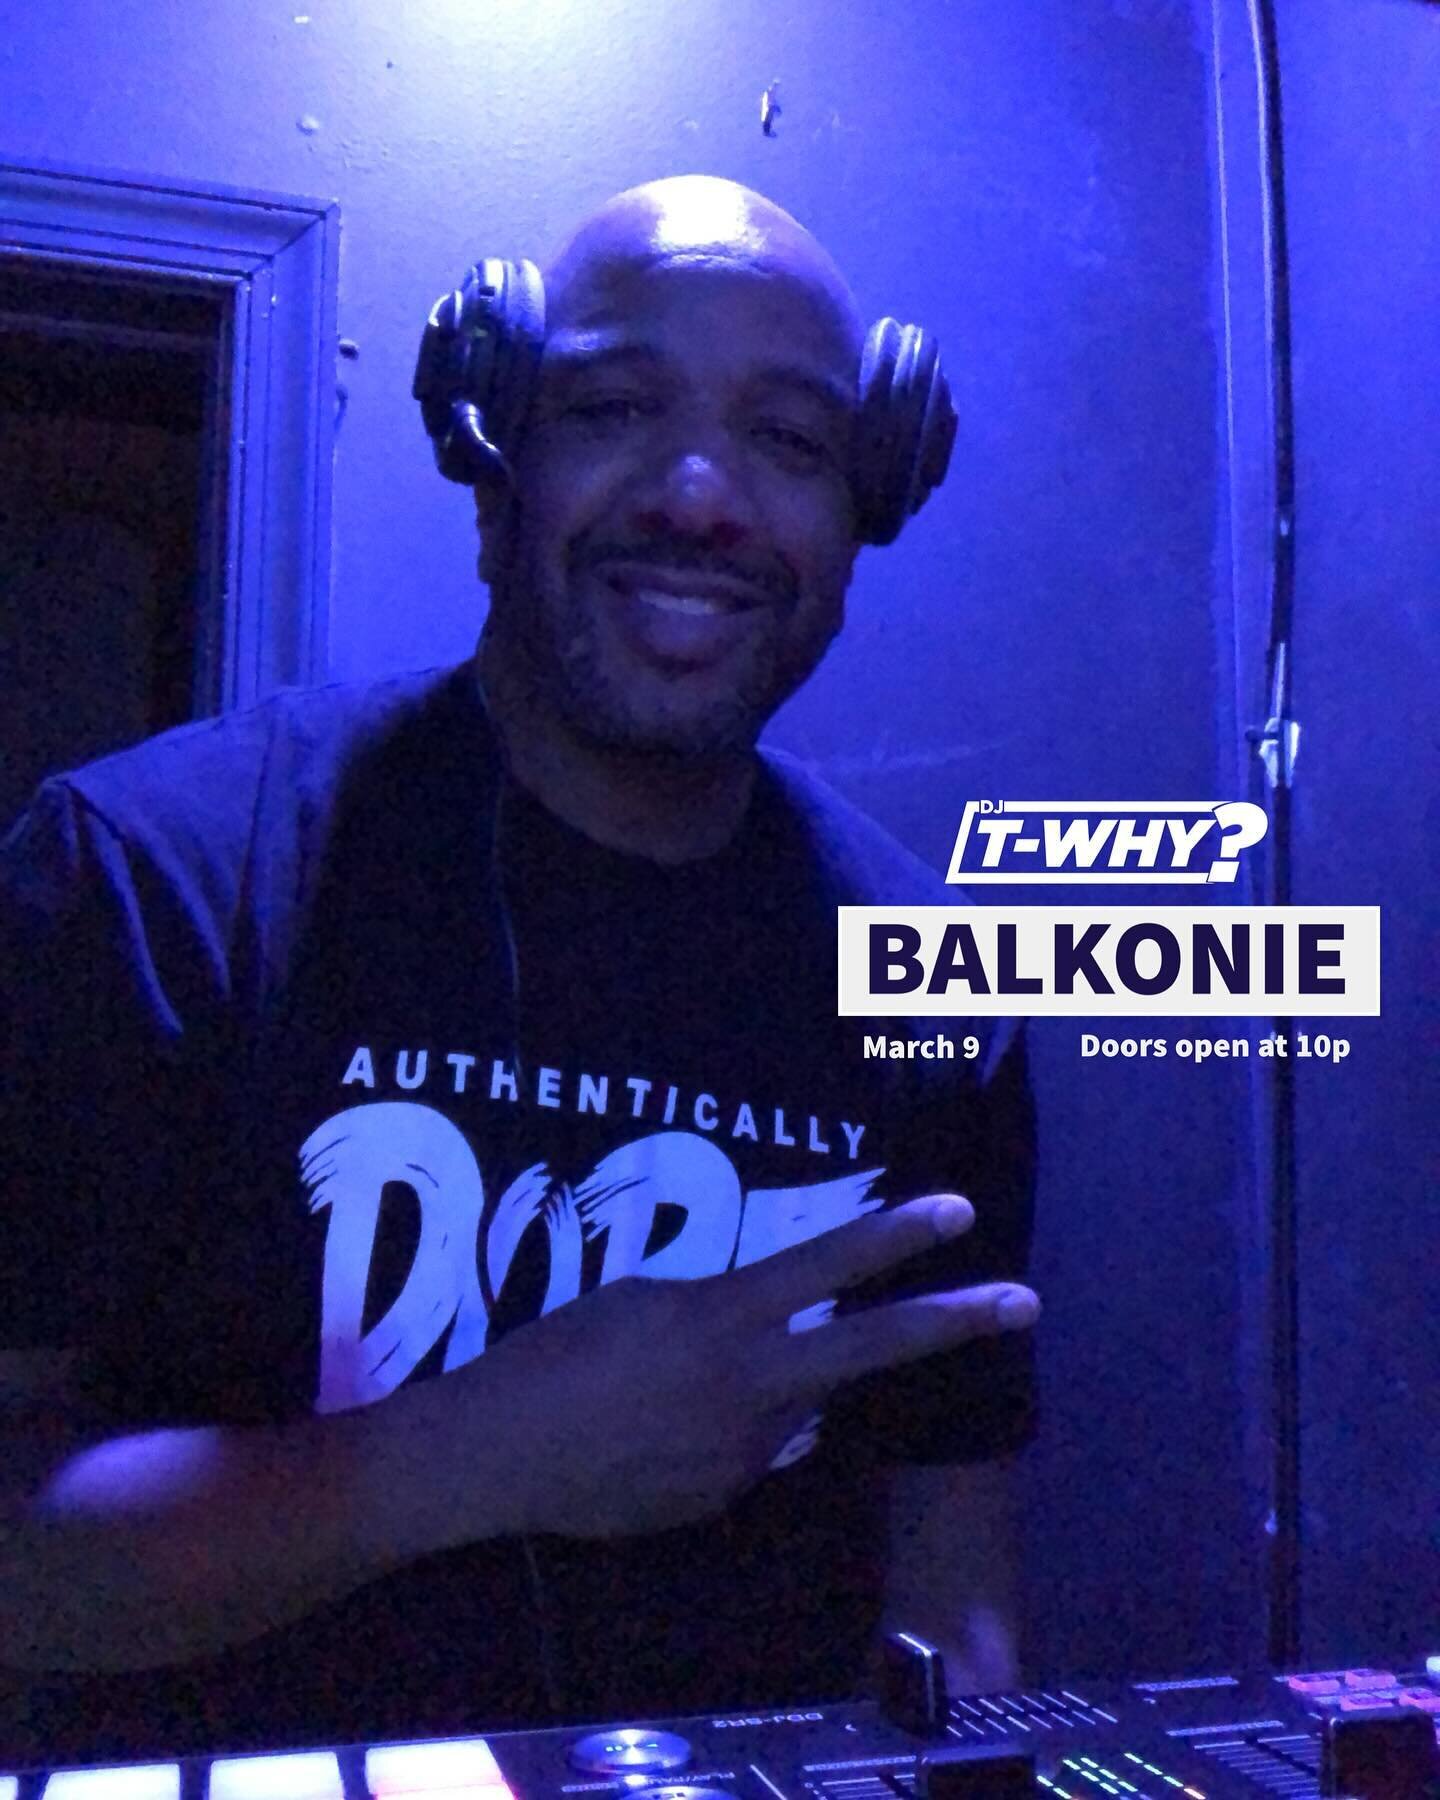 We&rsquo;re back at Balkonie tonight! Catch me, DJ Ablaze and DJ Bing&hellip;doors open at 10p. Come thru! 

#dmvevents 
#djtwhy